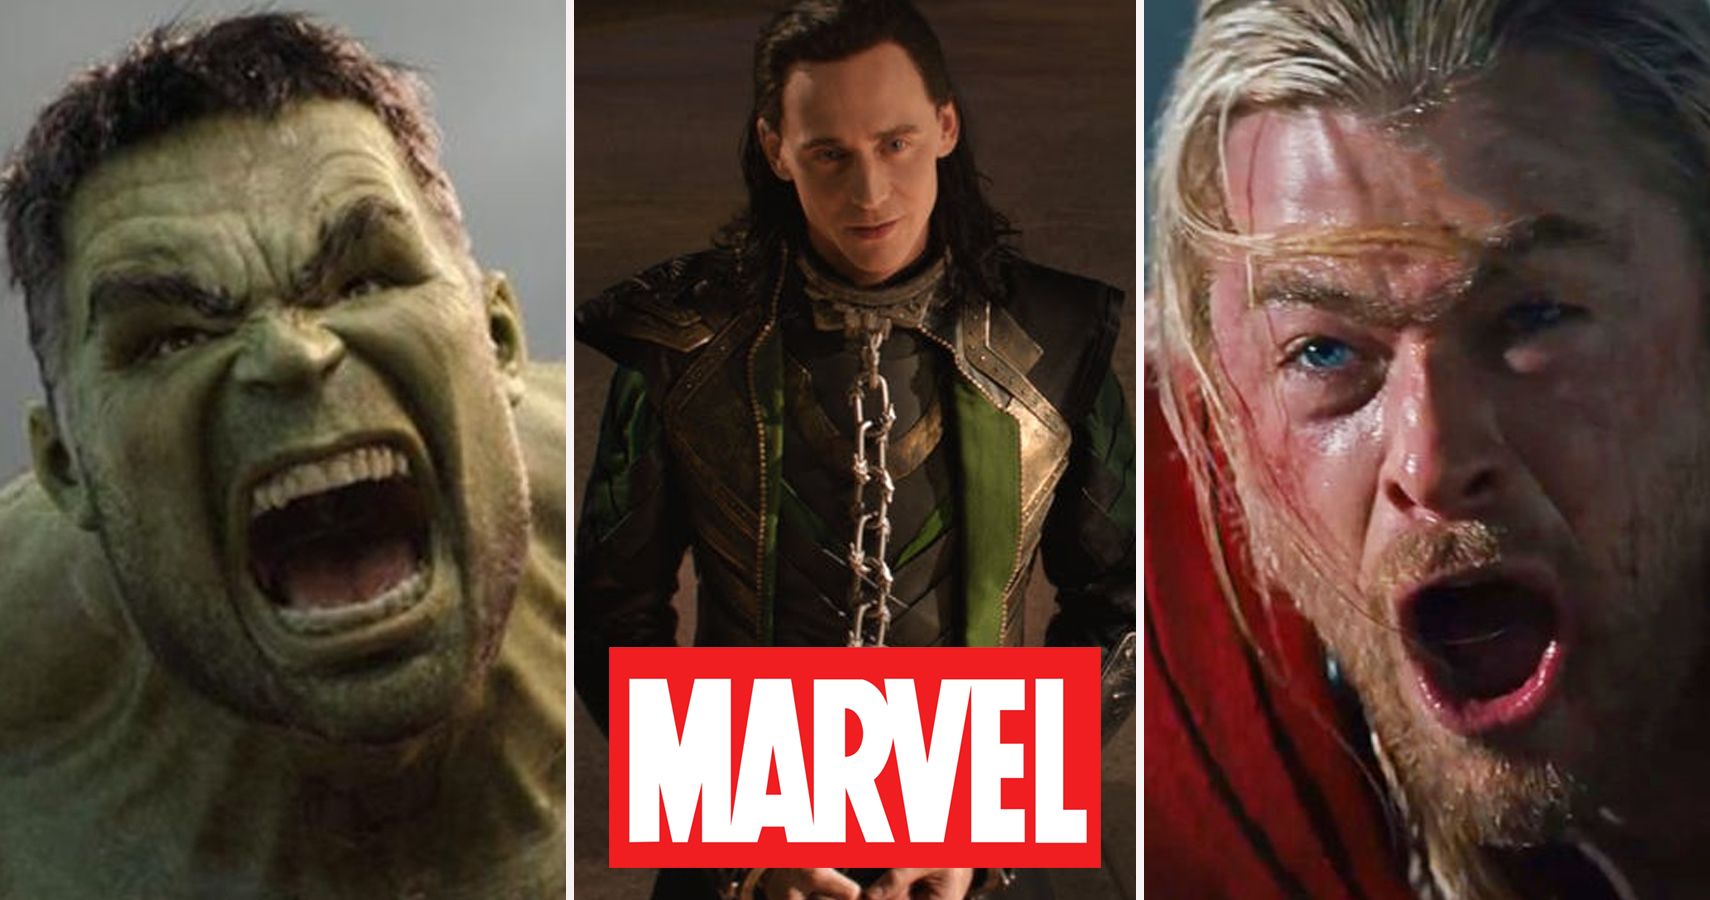 Why Is the MCU's Portrayal of the Hulk So Inconsistent?